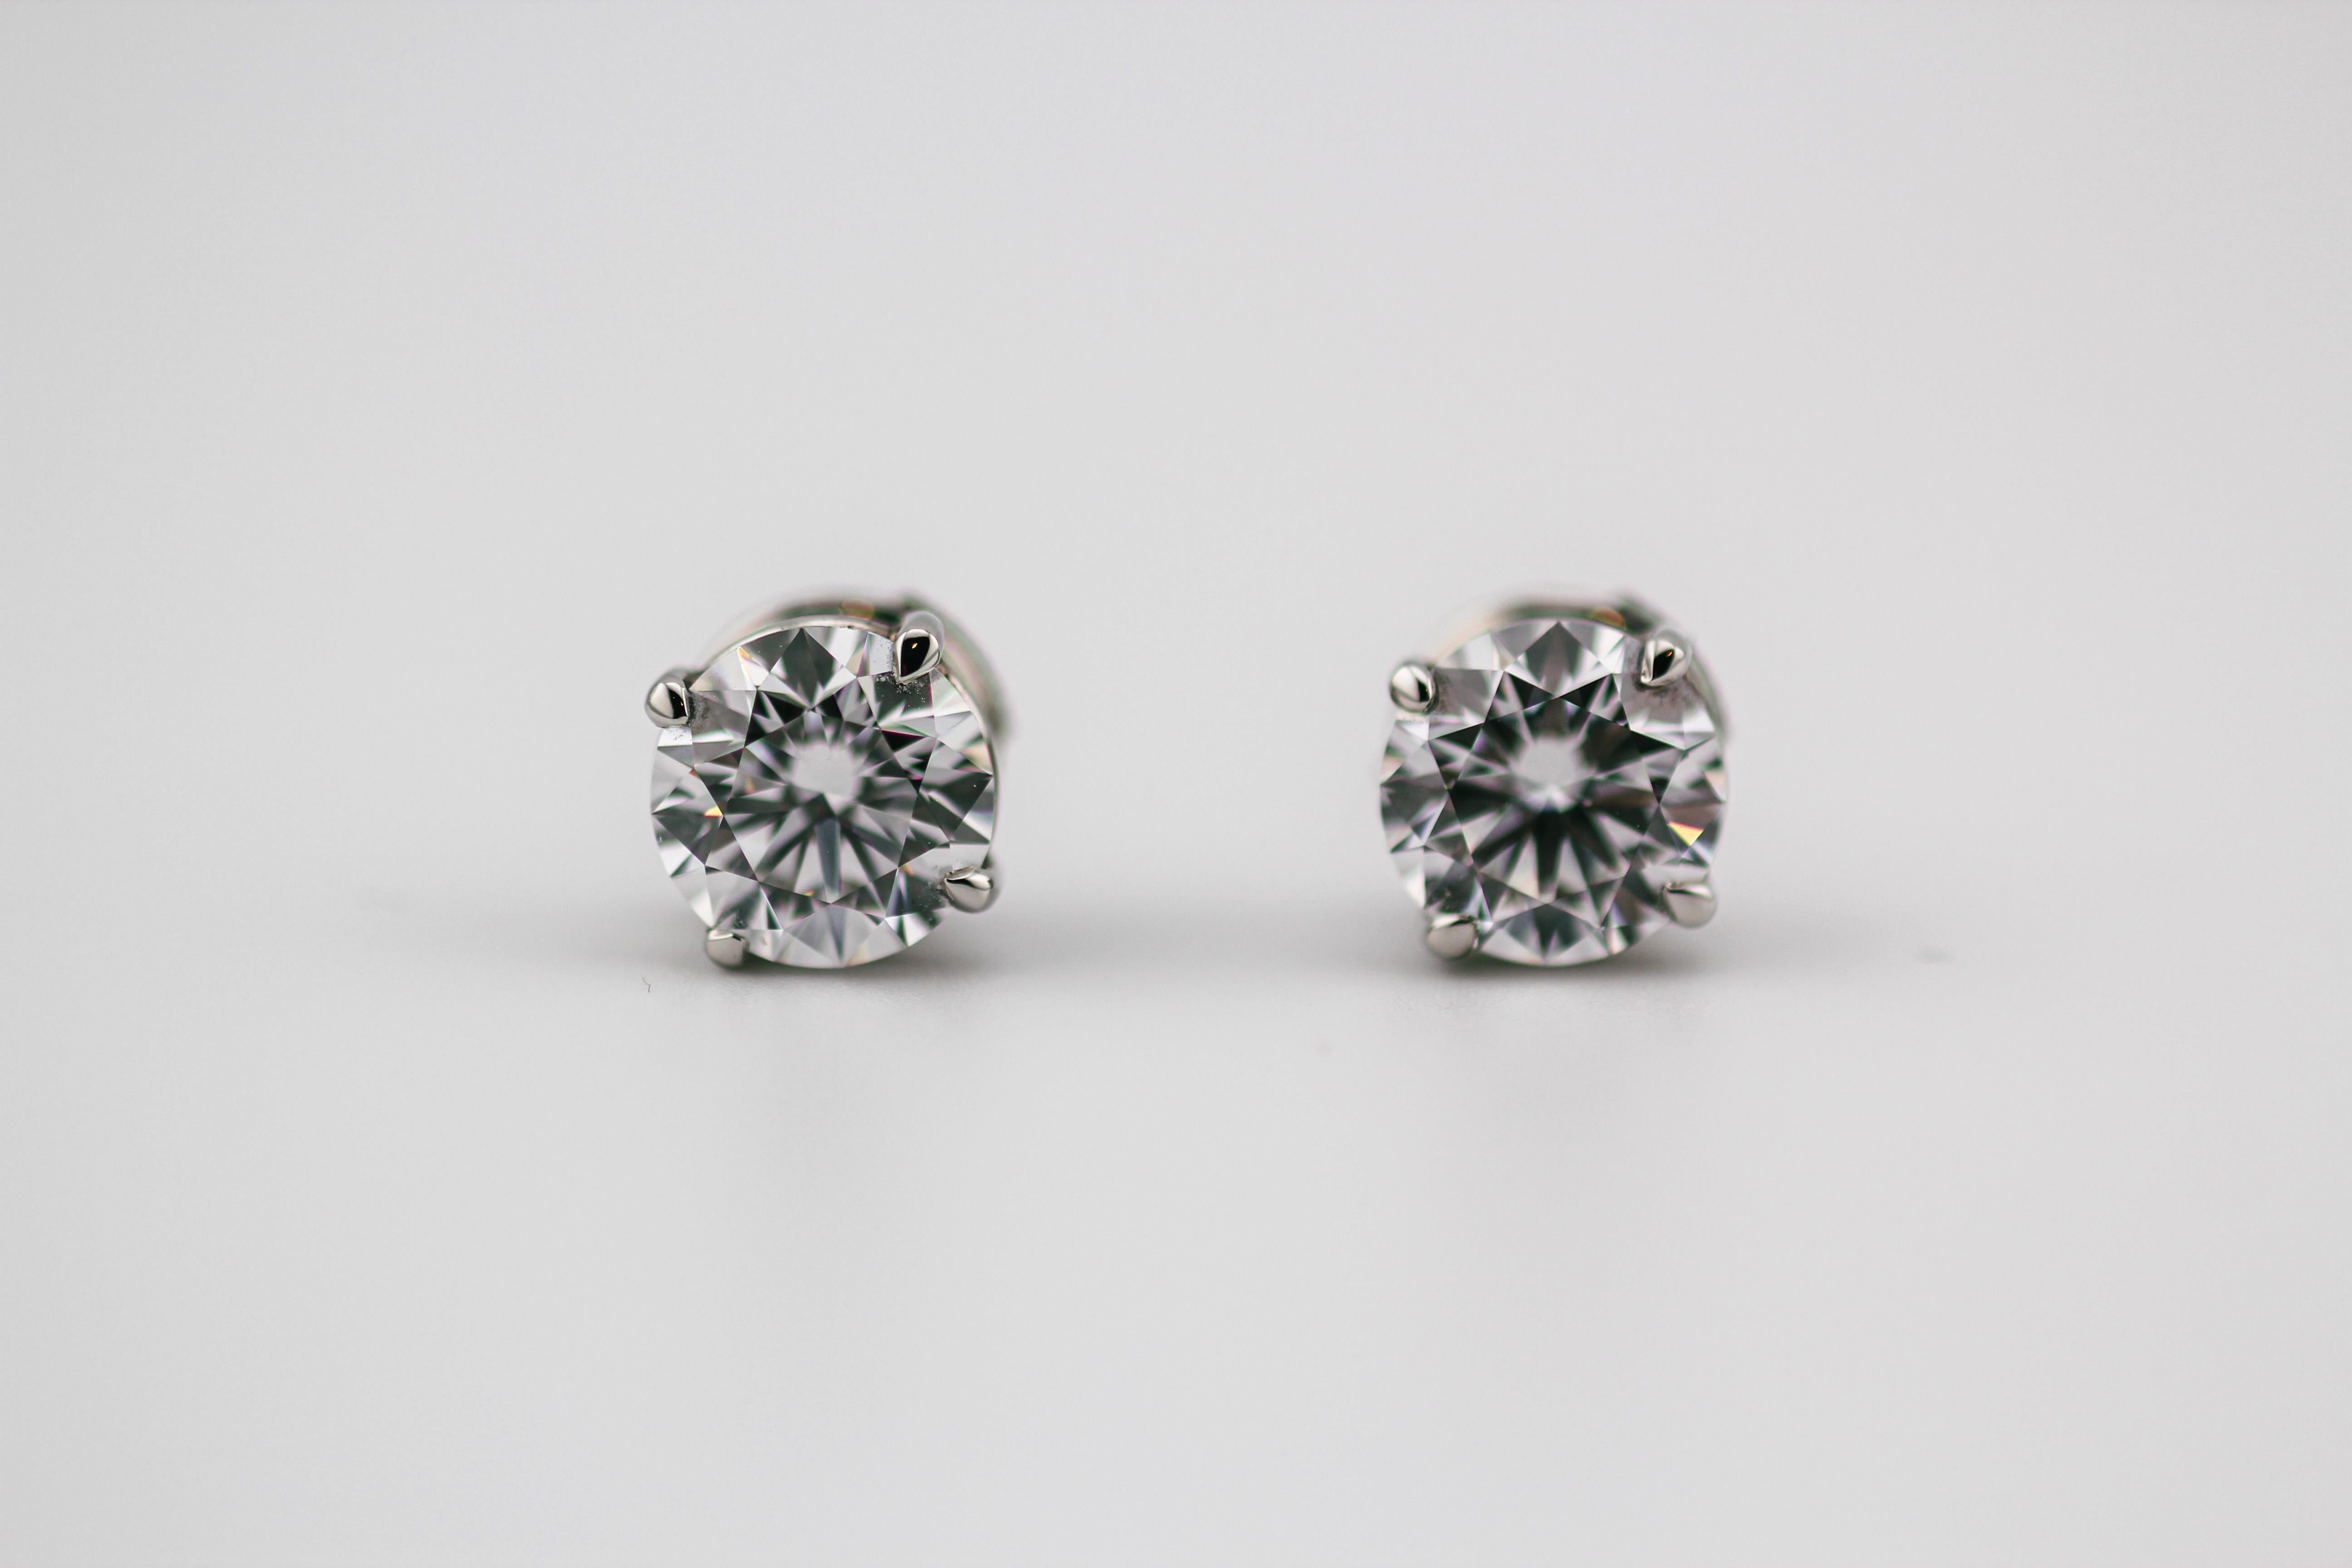 Behold the epitome of sophistication and purity in the form of this exquisite pair of GIA Certified 1.55 + 1.51 carat D Color IF Clarity Diamond Platinum Studs Earrings. Crafted with precision and elegance, these earrings are a celebration of